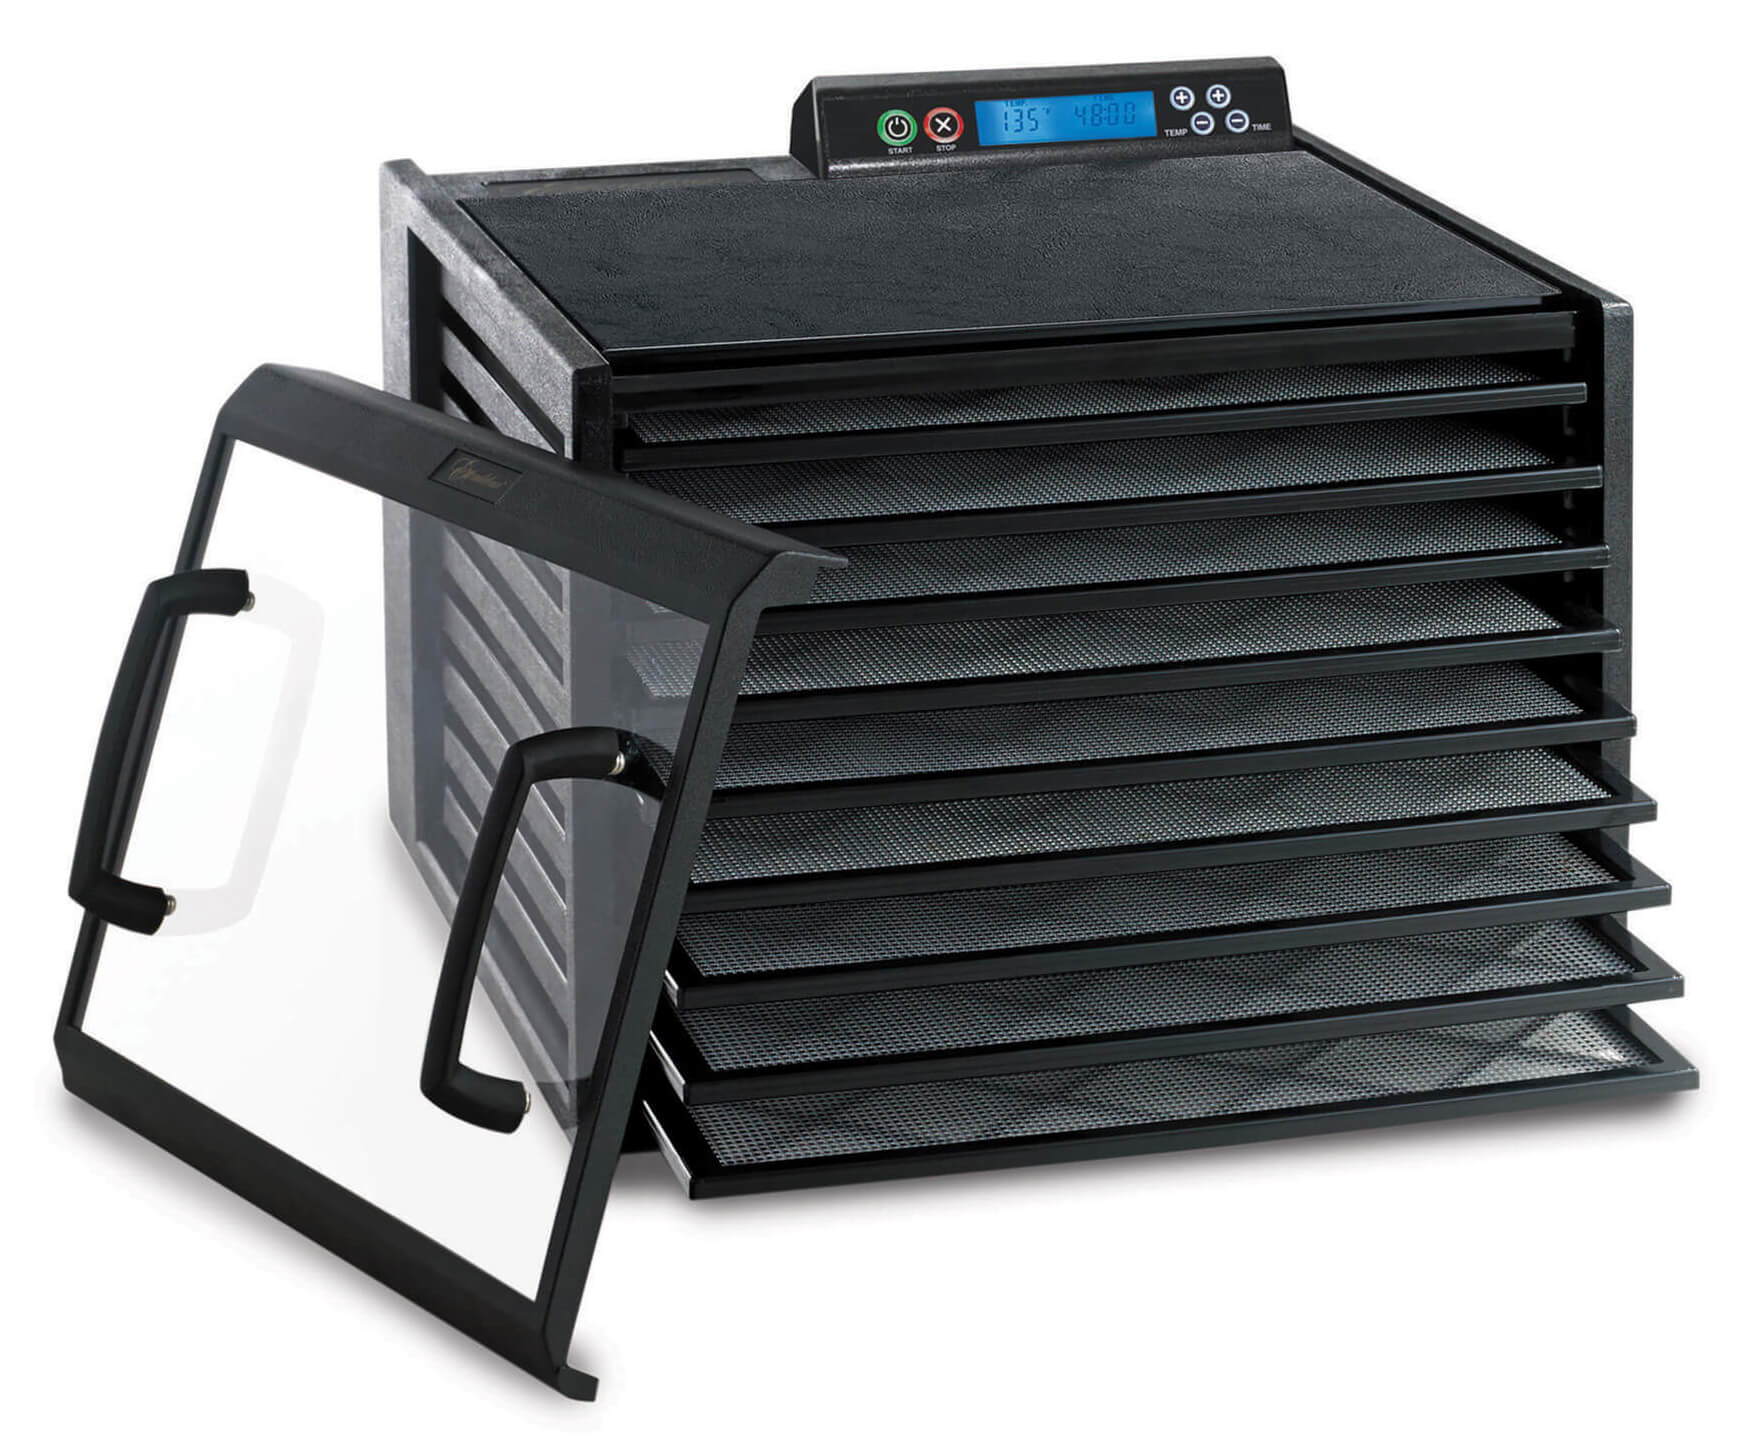 Excalibur 4948CDB 9 tray dehydrator with clear door propped to the side.